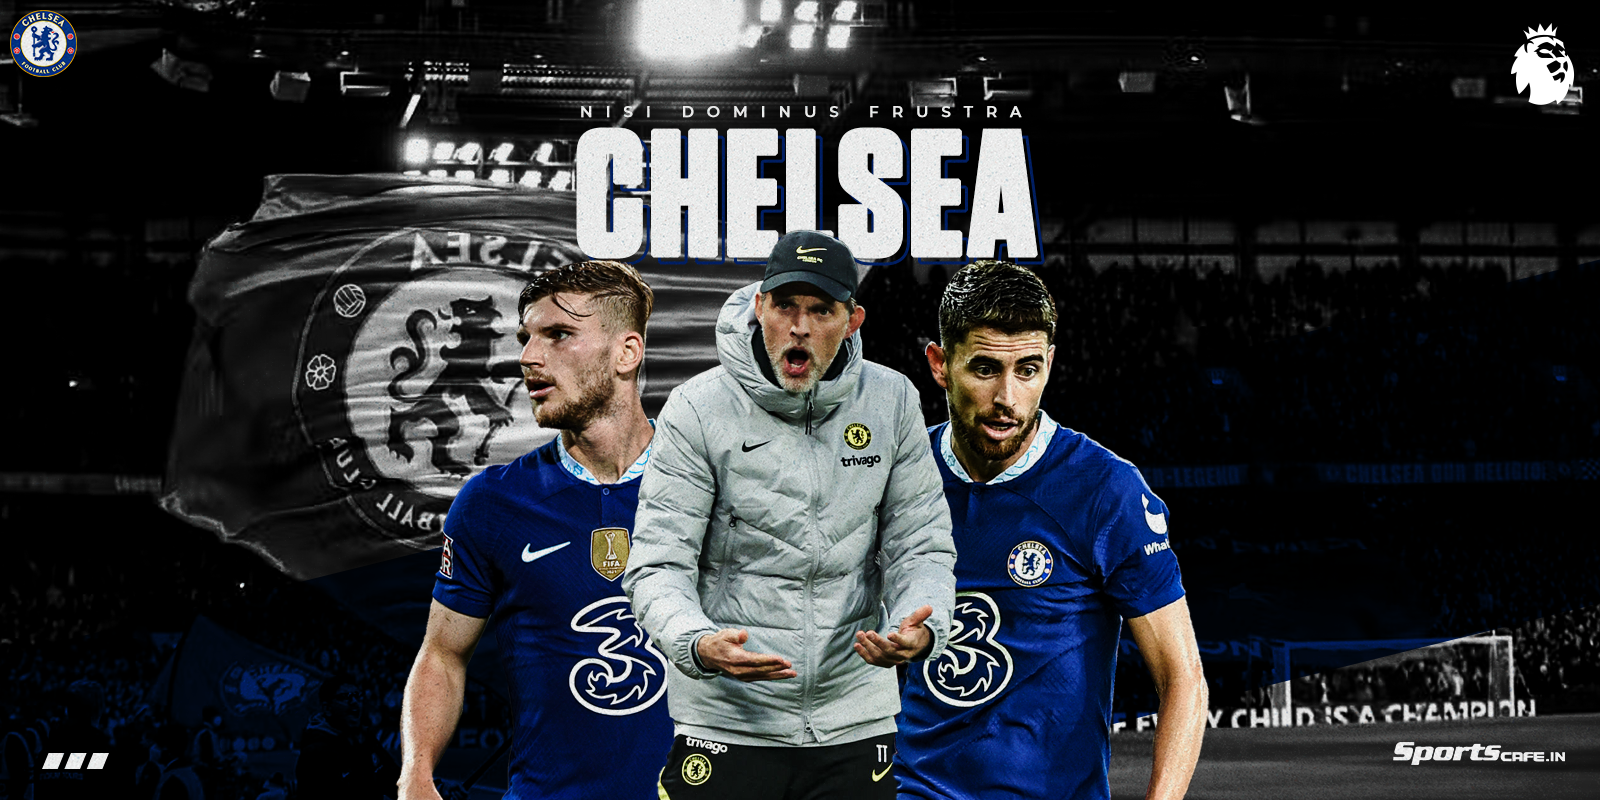 2022/23 Premier League Previews | Chelsea, Thomas Tuchel and a new owner's hope for the future